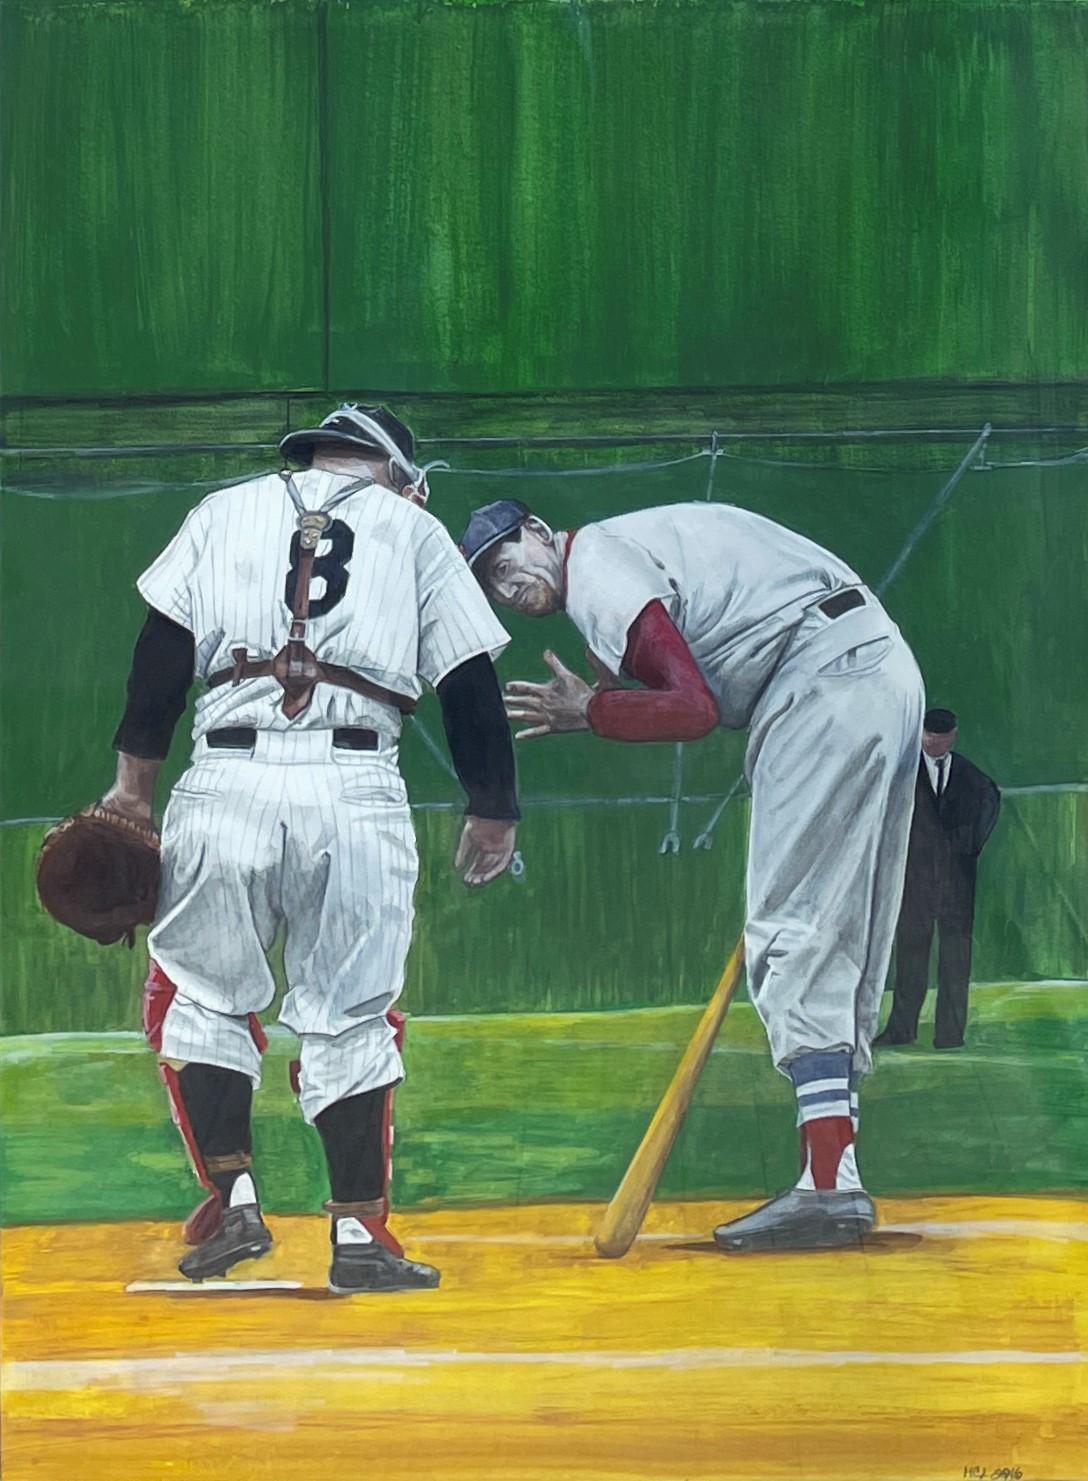 Margie Lawrence Portrait - Yogi and Ted - Baseball Greats Yogi Berra and Ted Williams, Watercolor on Paper